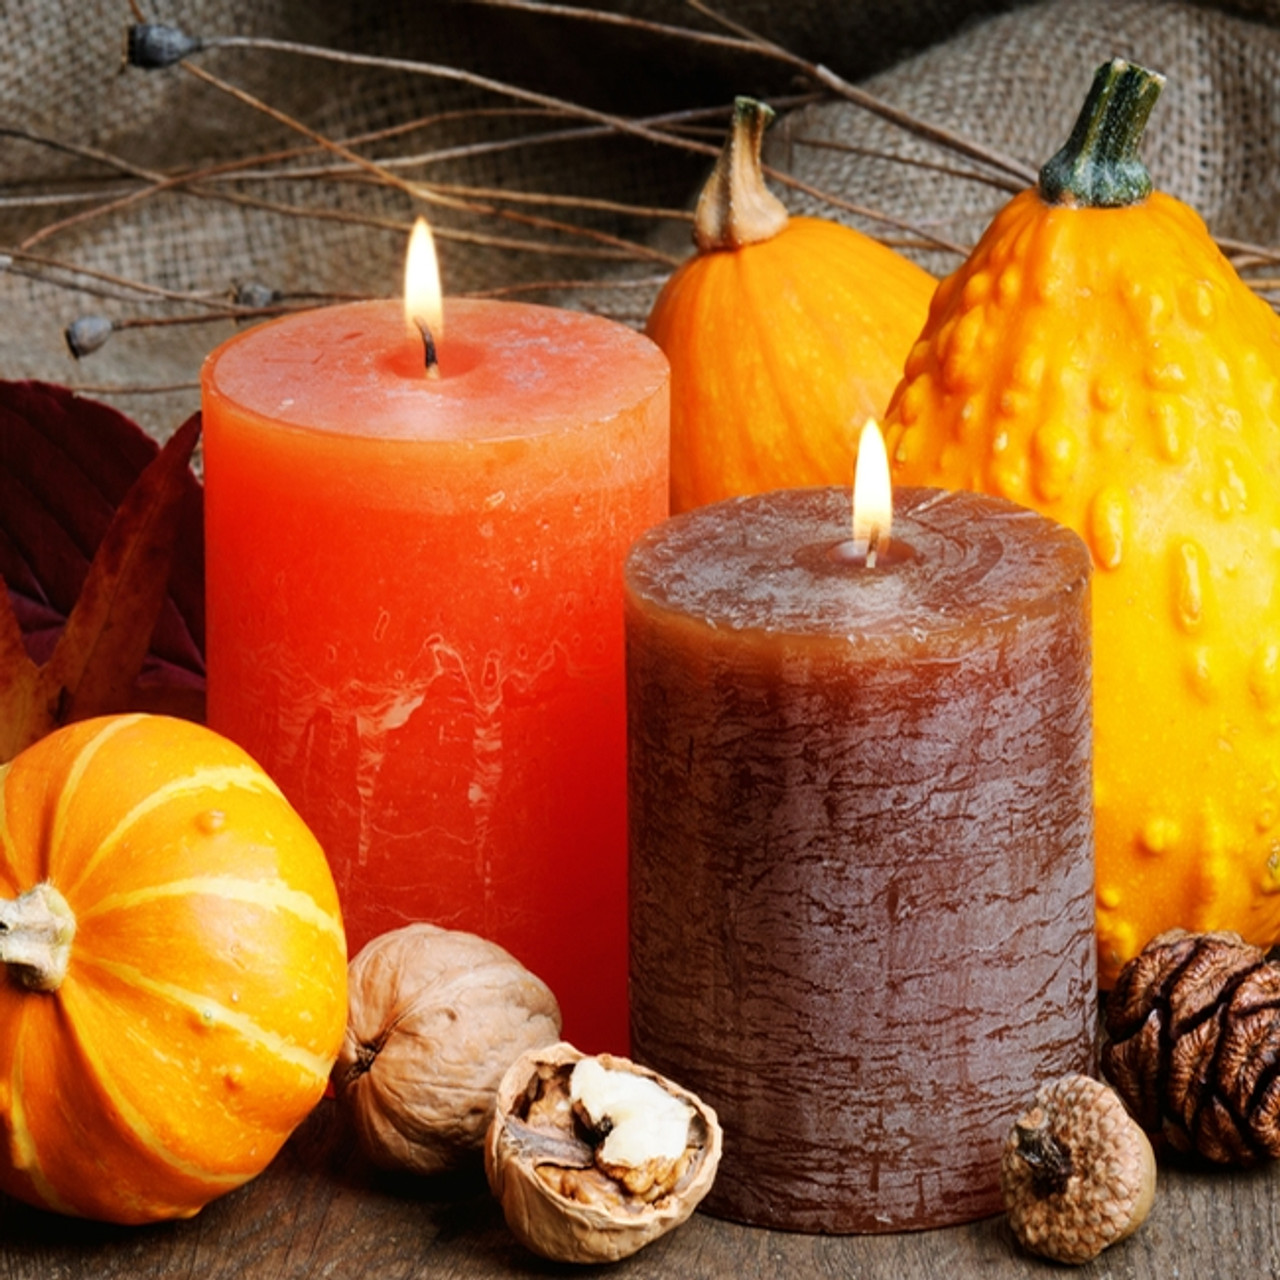 Candle Making Supplies, Soap, & DIY Cosmetic Making